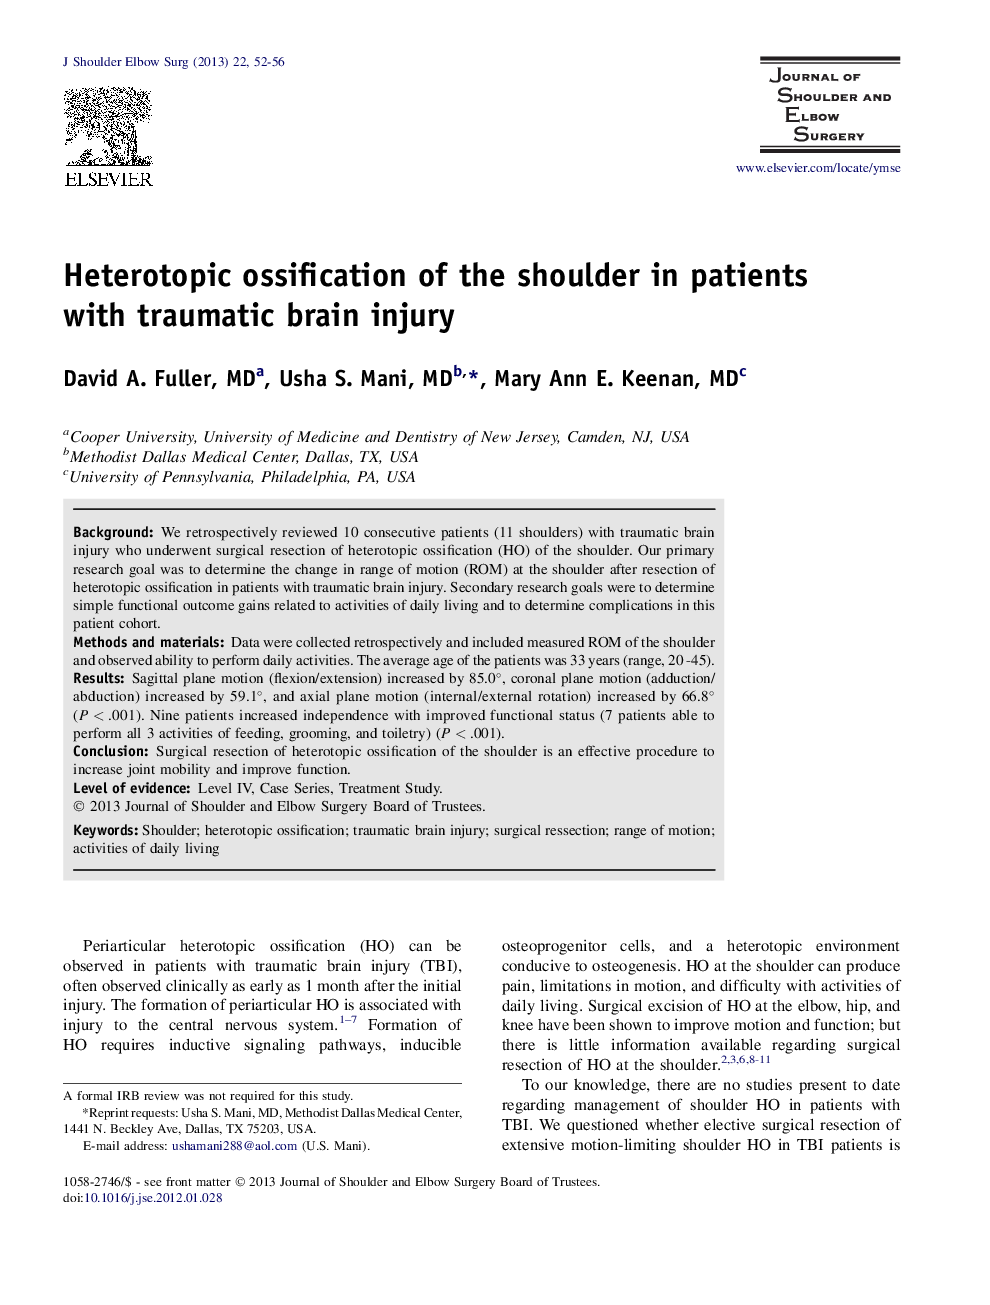 Heterotopic ossification of the shoulder in patients with traumatic brain injury 